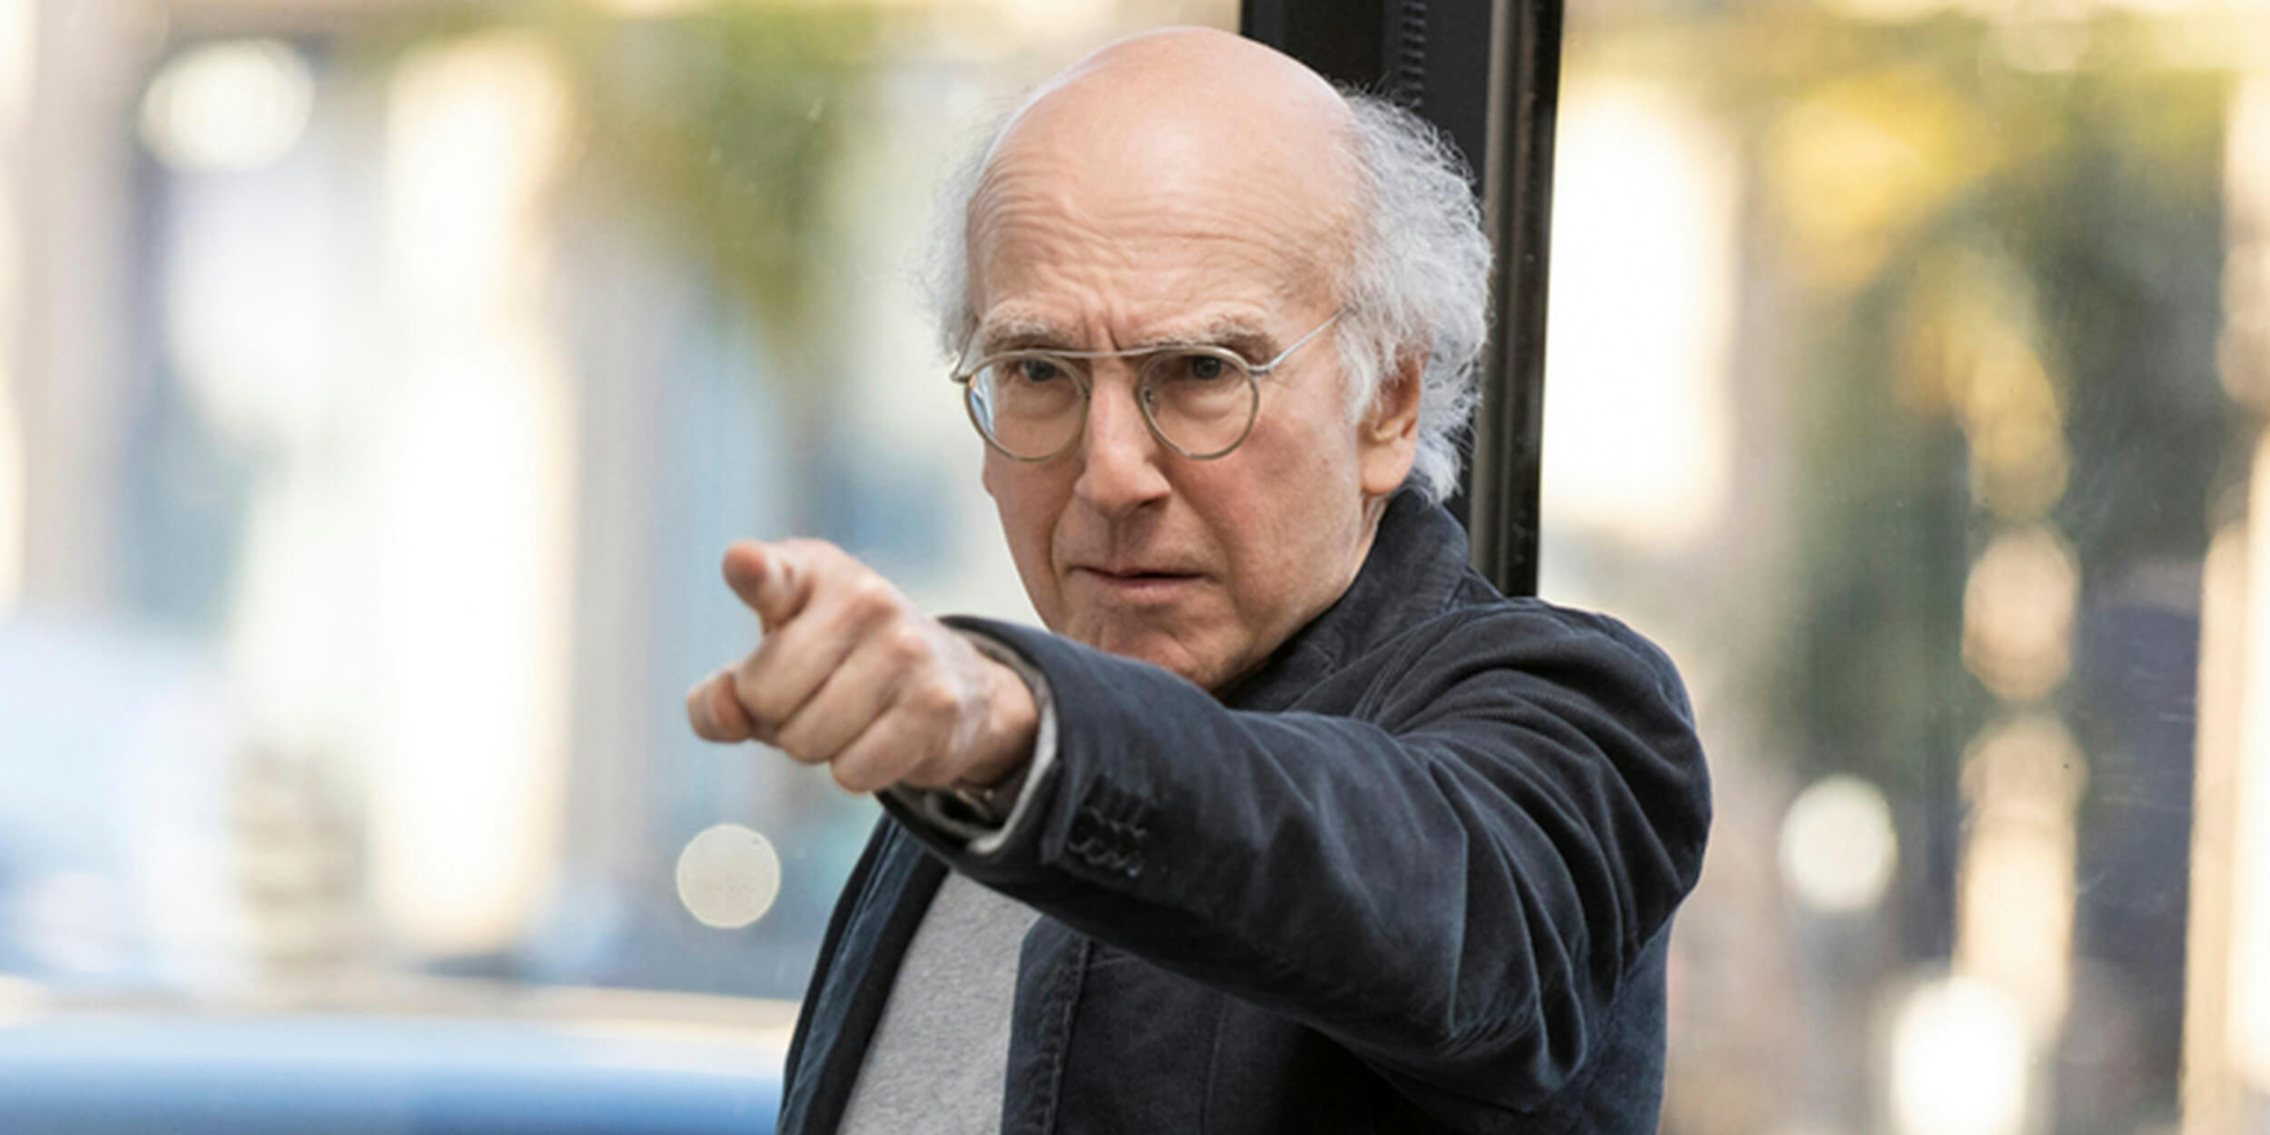 curb your enthusiasm, larry david pointing